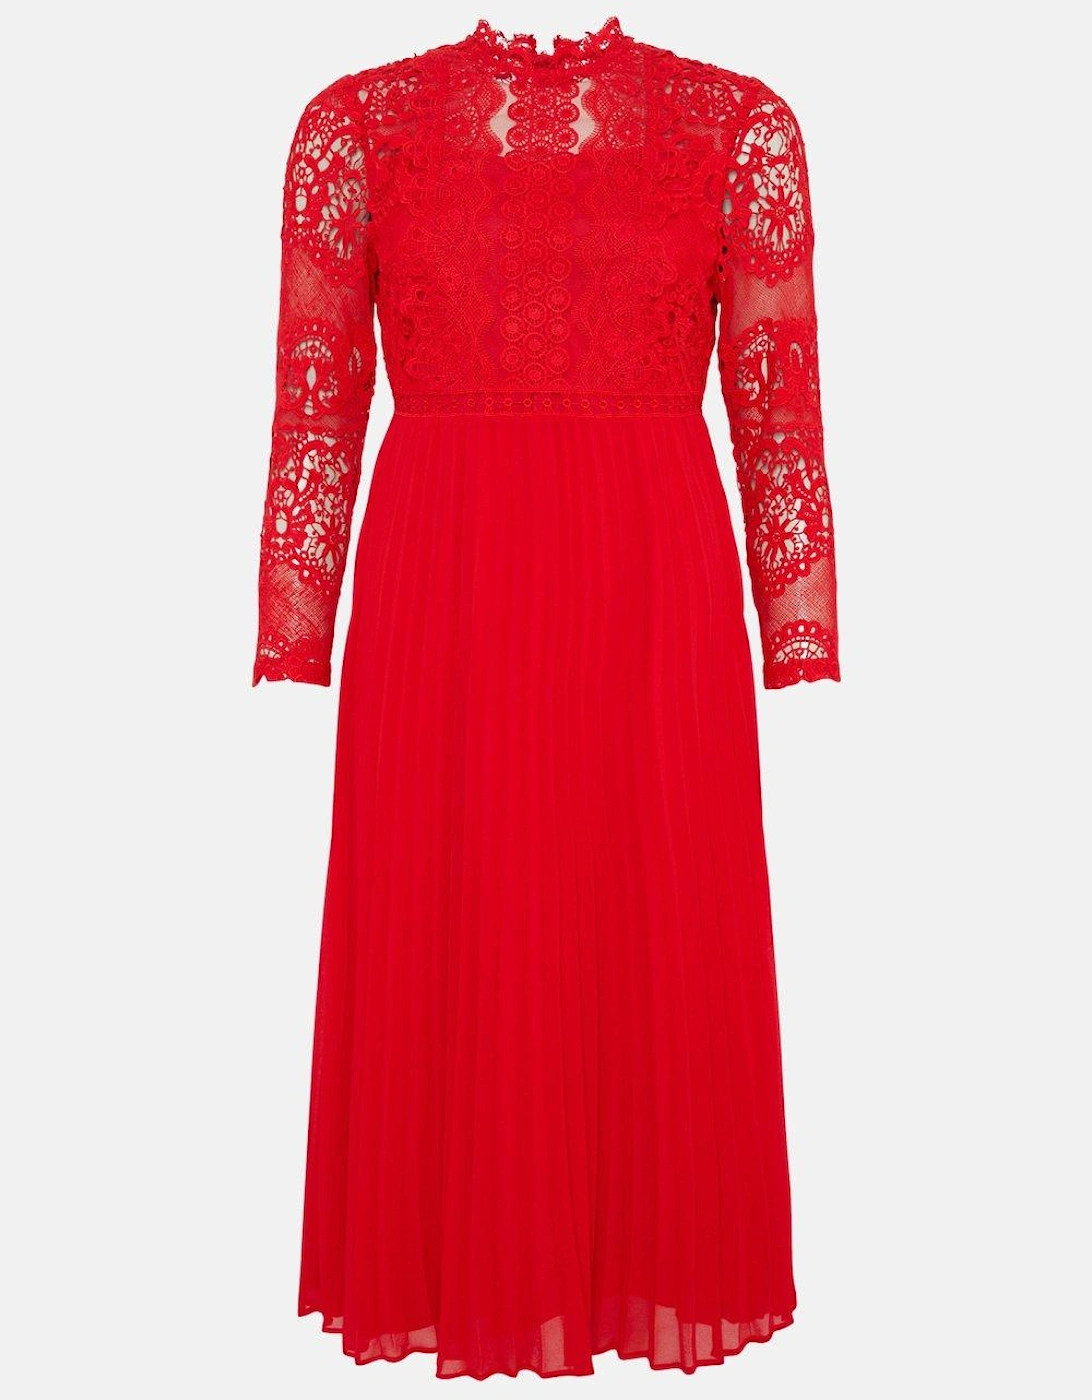 Petite Sleeved Lace High Neck Pleated Dress